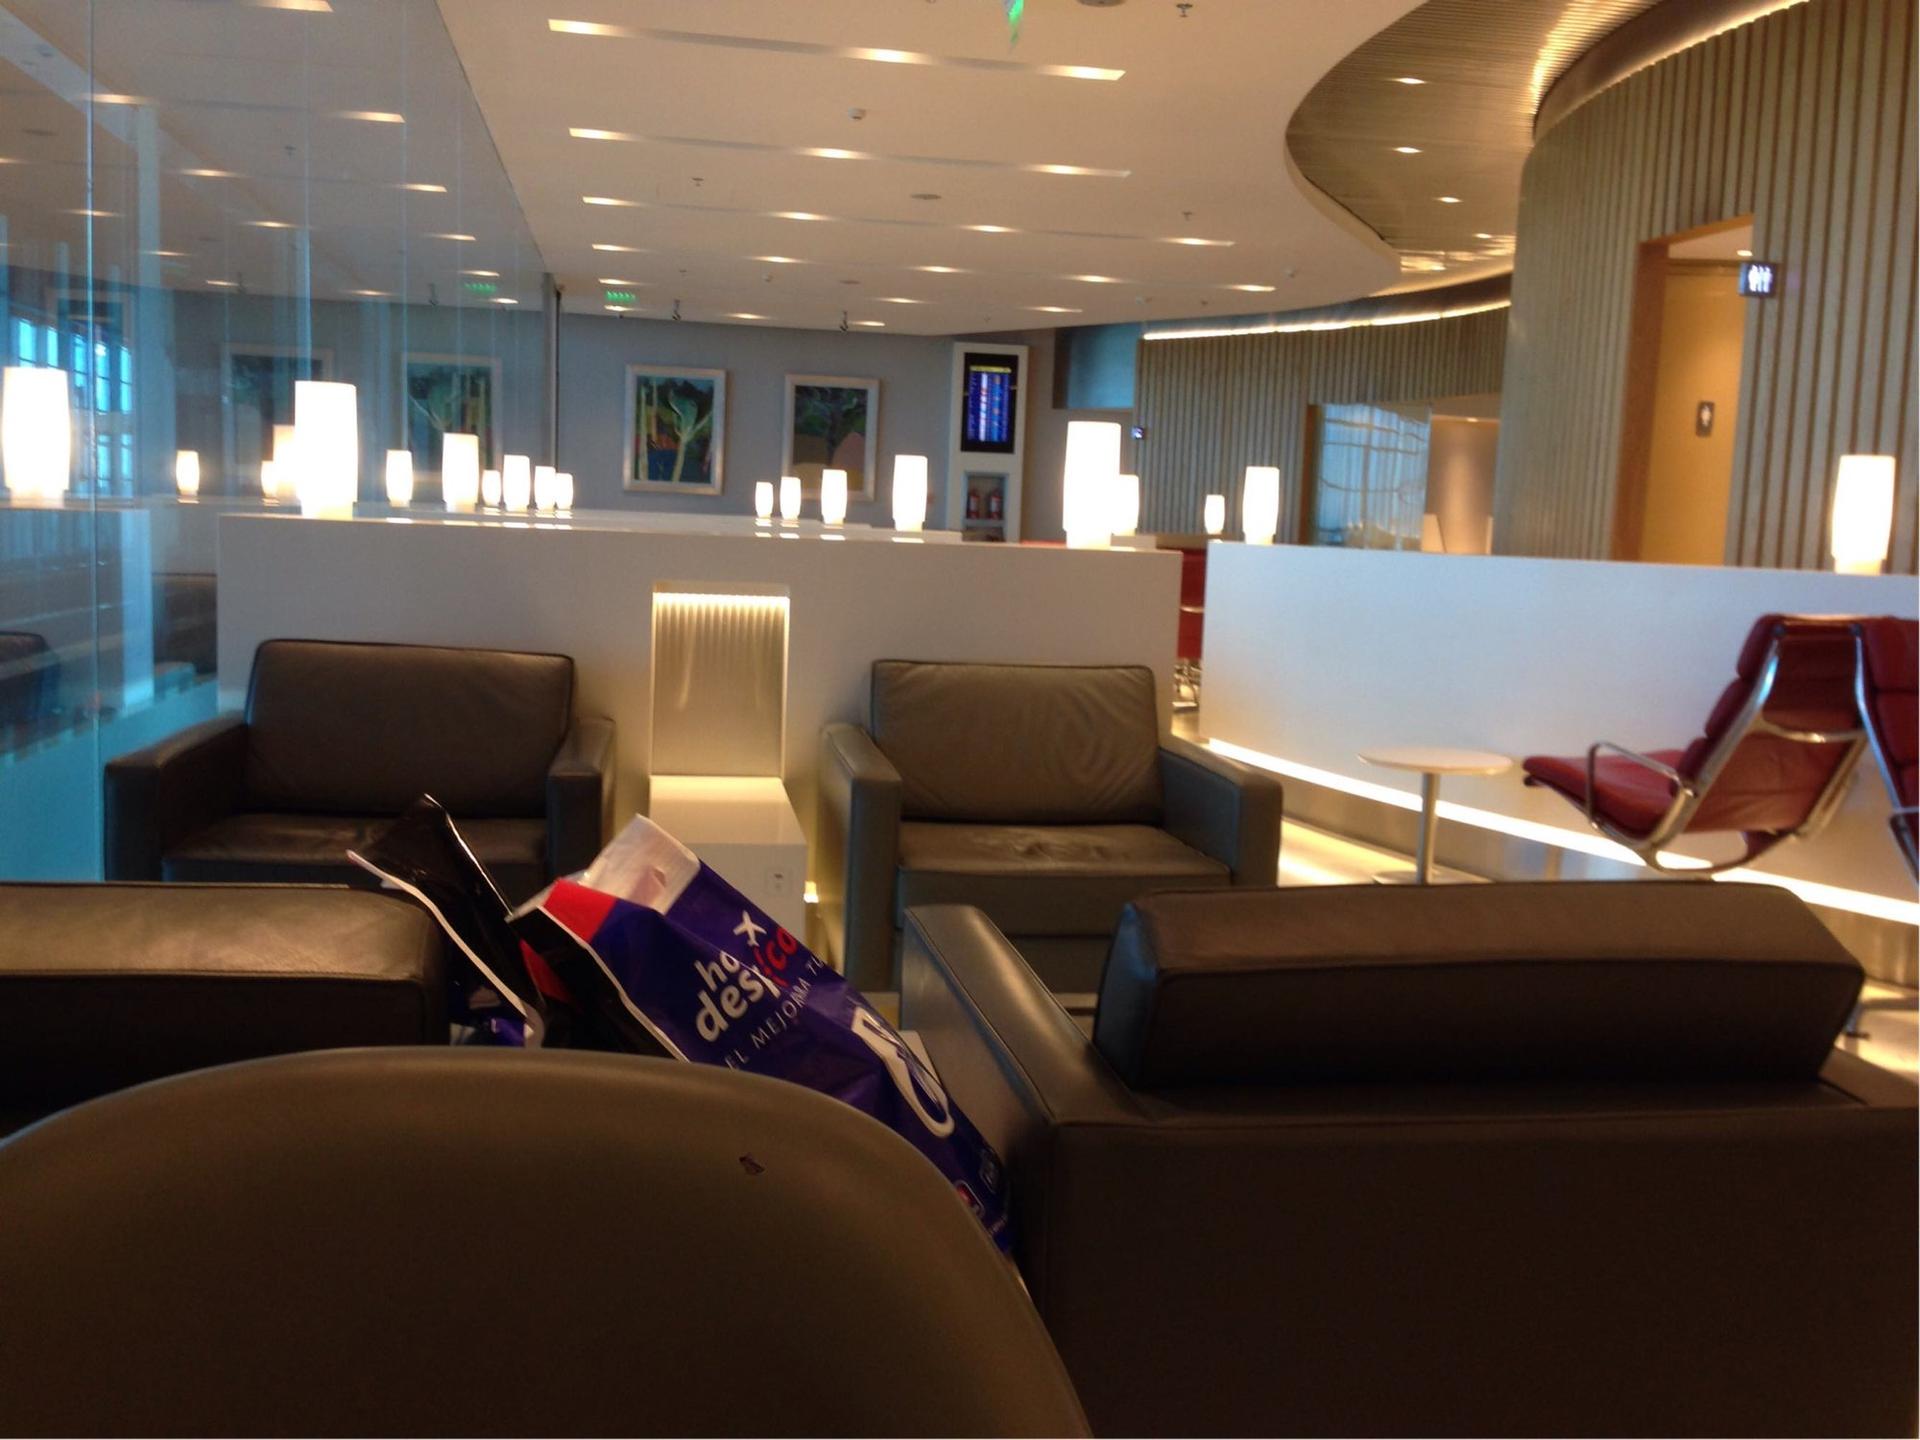 American Airlines Admirals Club & Iberia VIP Lounge image 1 of 18